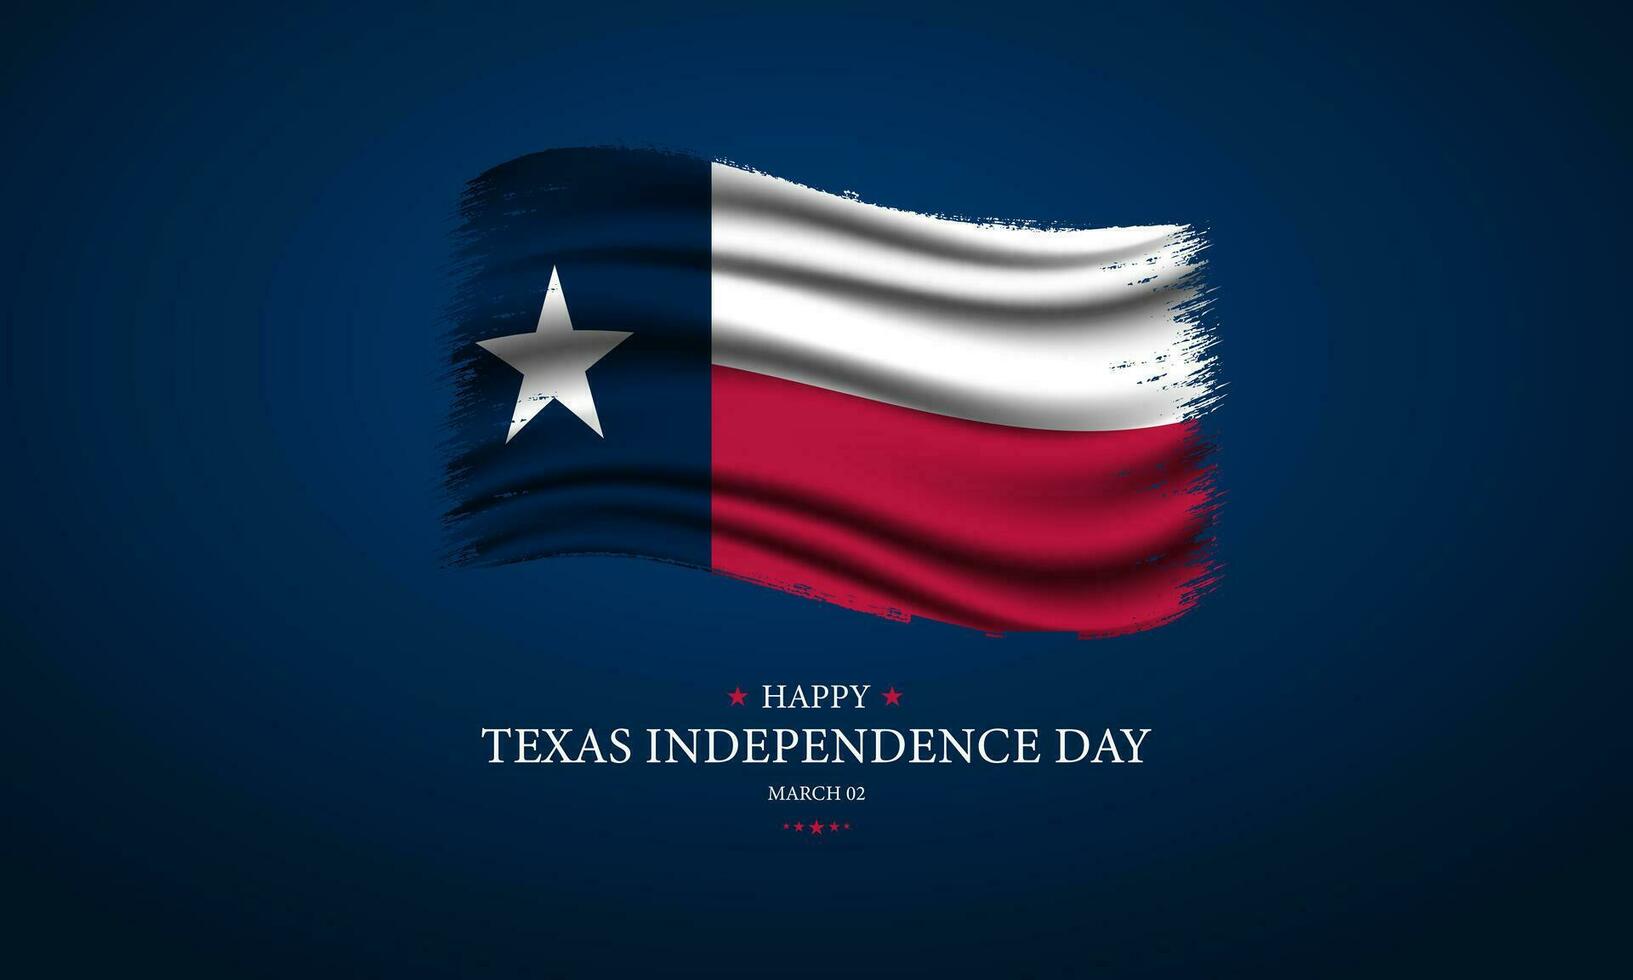 Texas Independence Day Background vector illustration